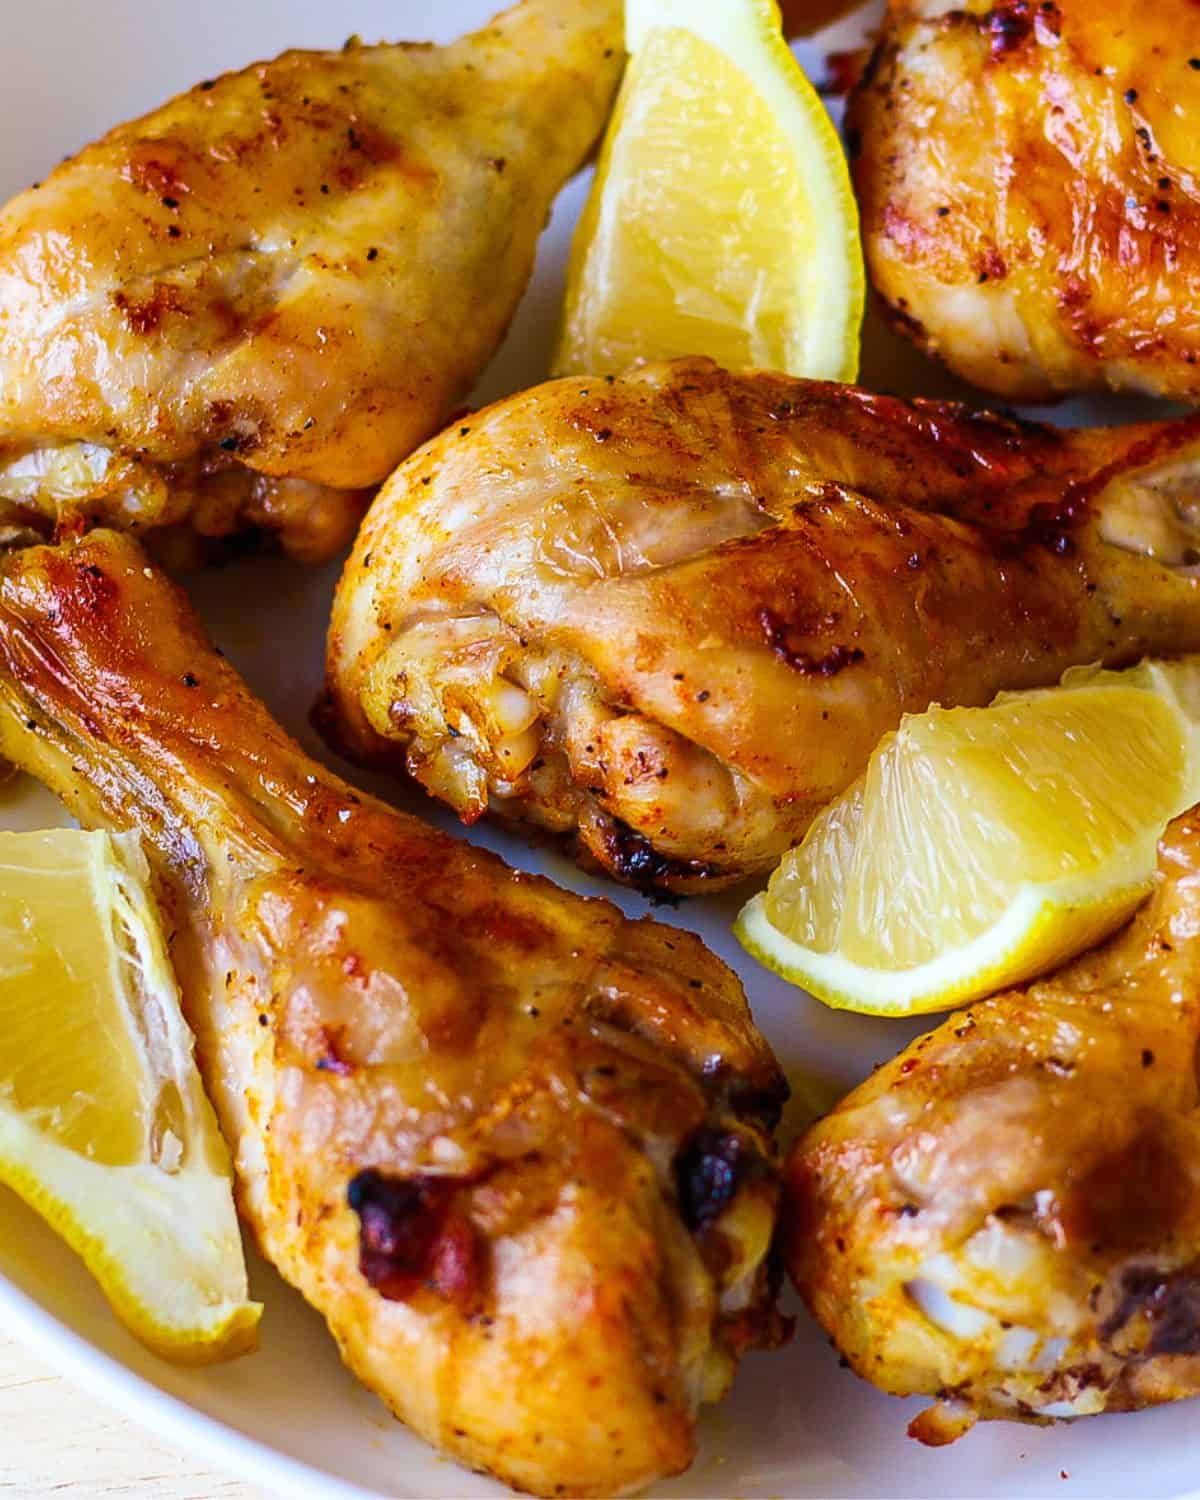 Close-up view of cooked chicken legs with a few fresh lemon wedges and specks of black pepper on top.